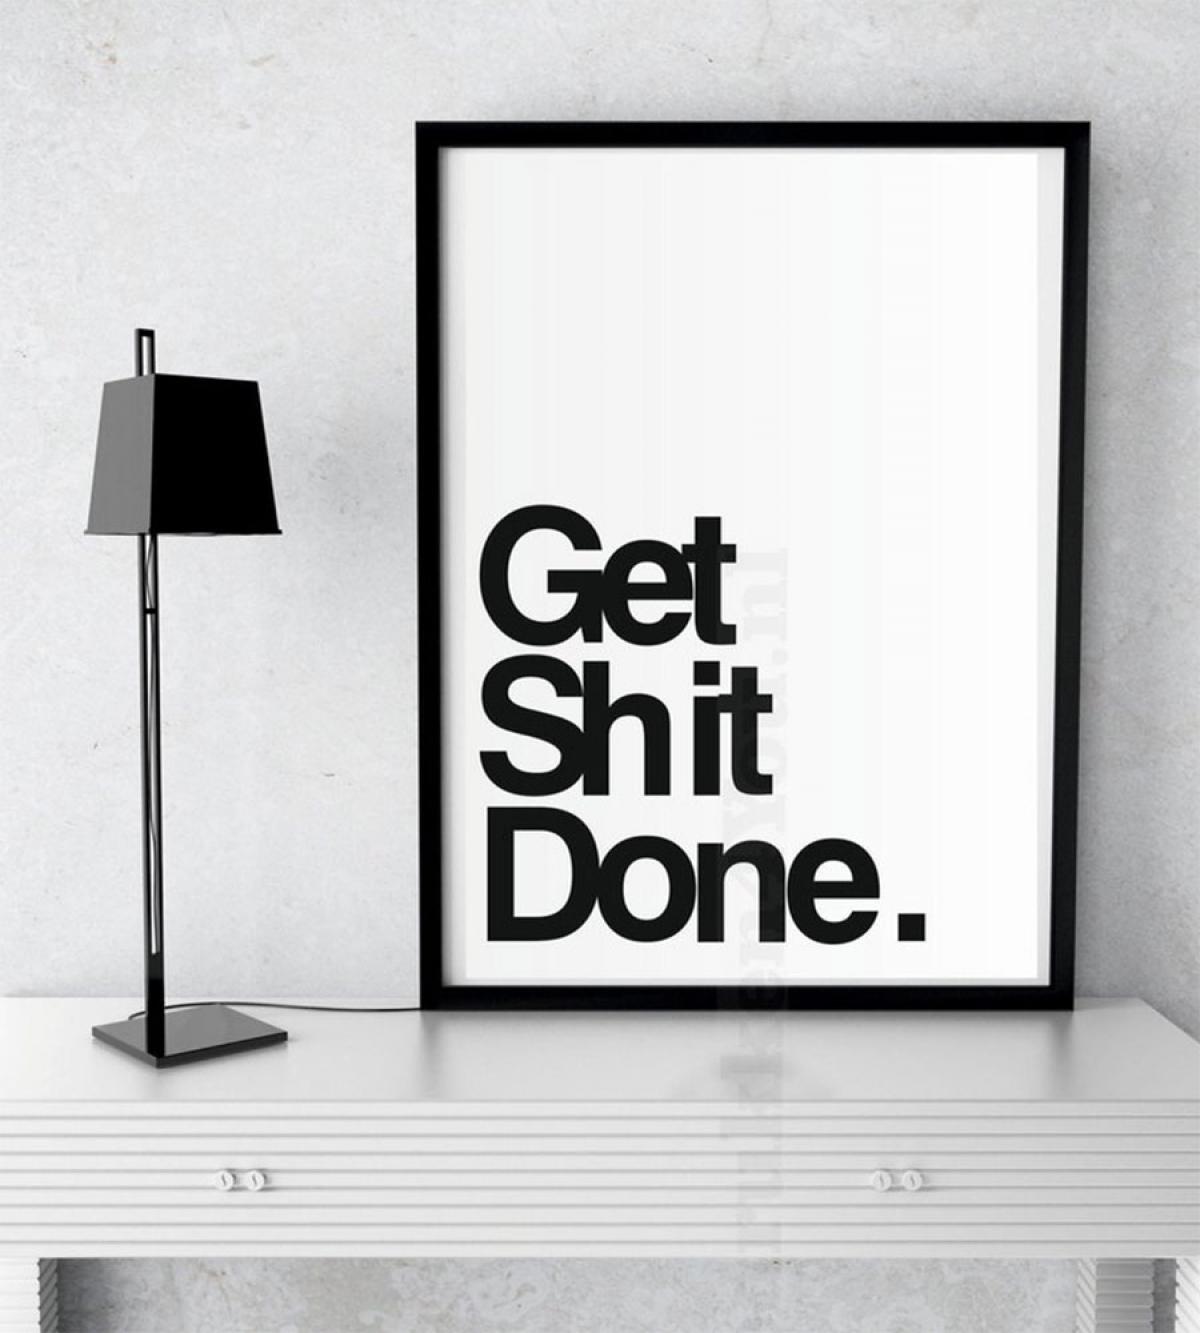 Get shit done.